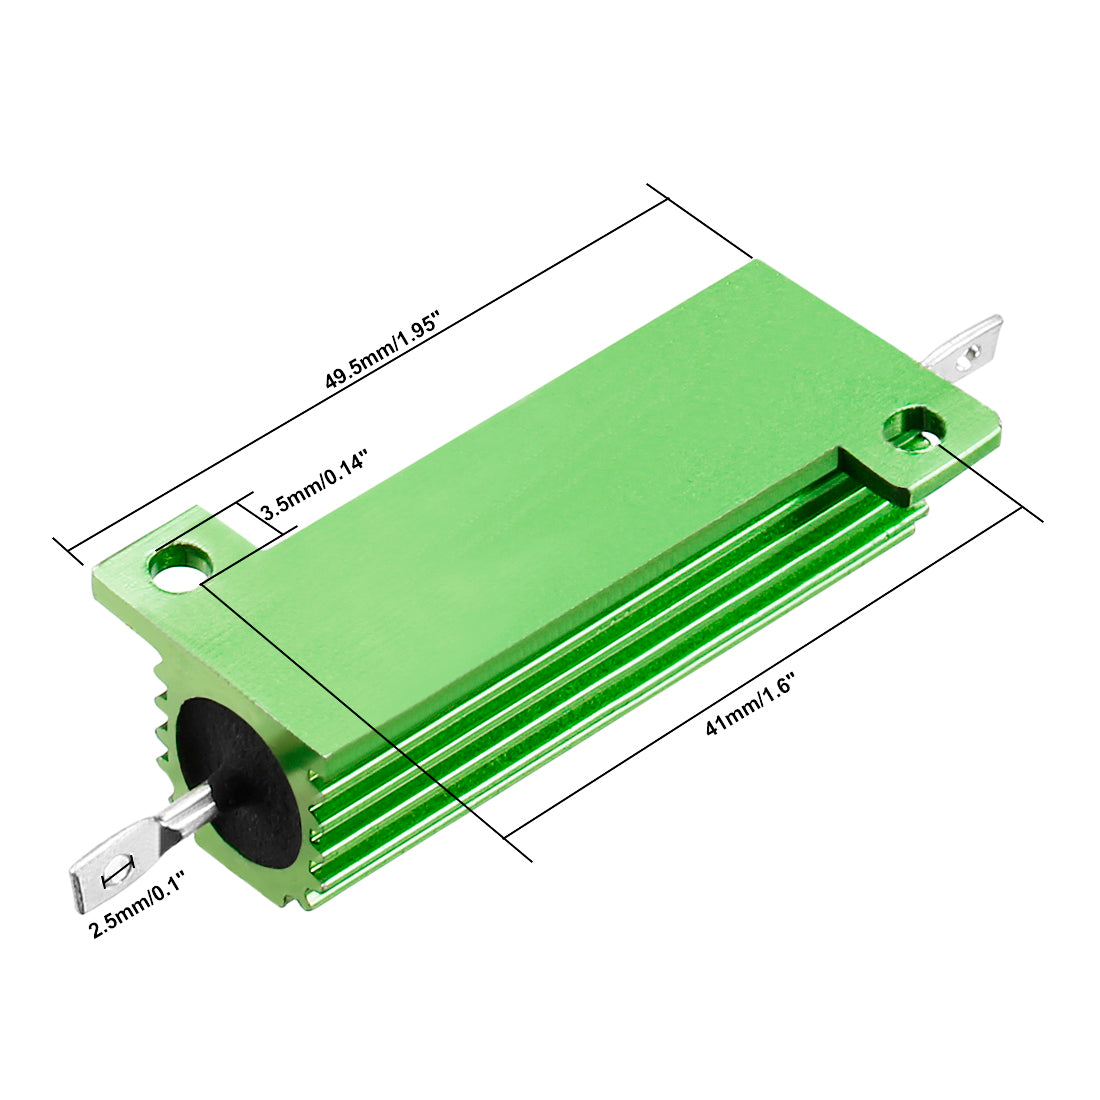 uxcell Uxcell 50W 0.8 Ohm 5% Aluminum Housing Resistor Screw  Chassis Mounted Aluminum Case Wirewound Resistor Load Resistors Green 2 pcs